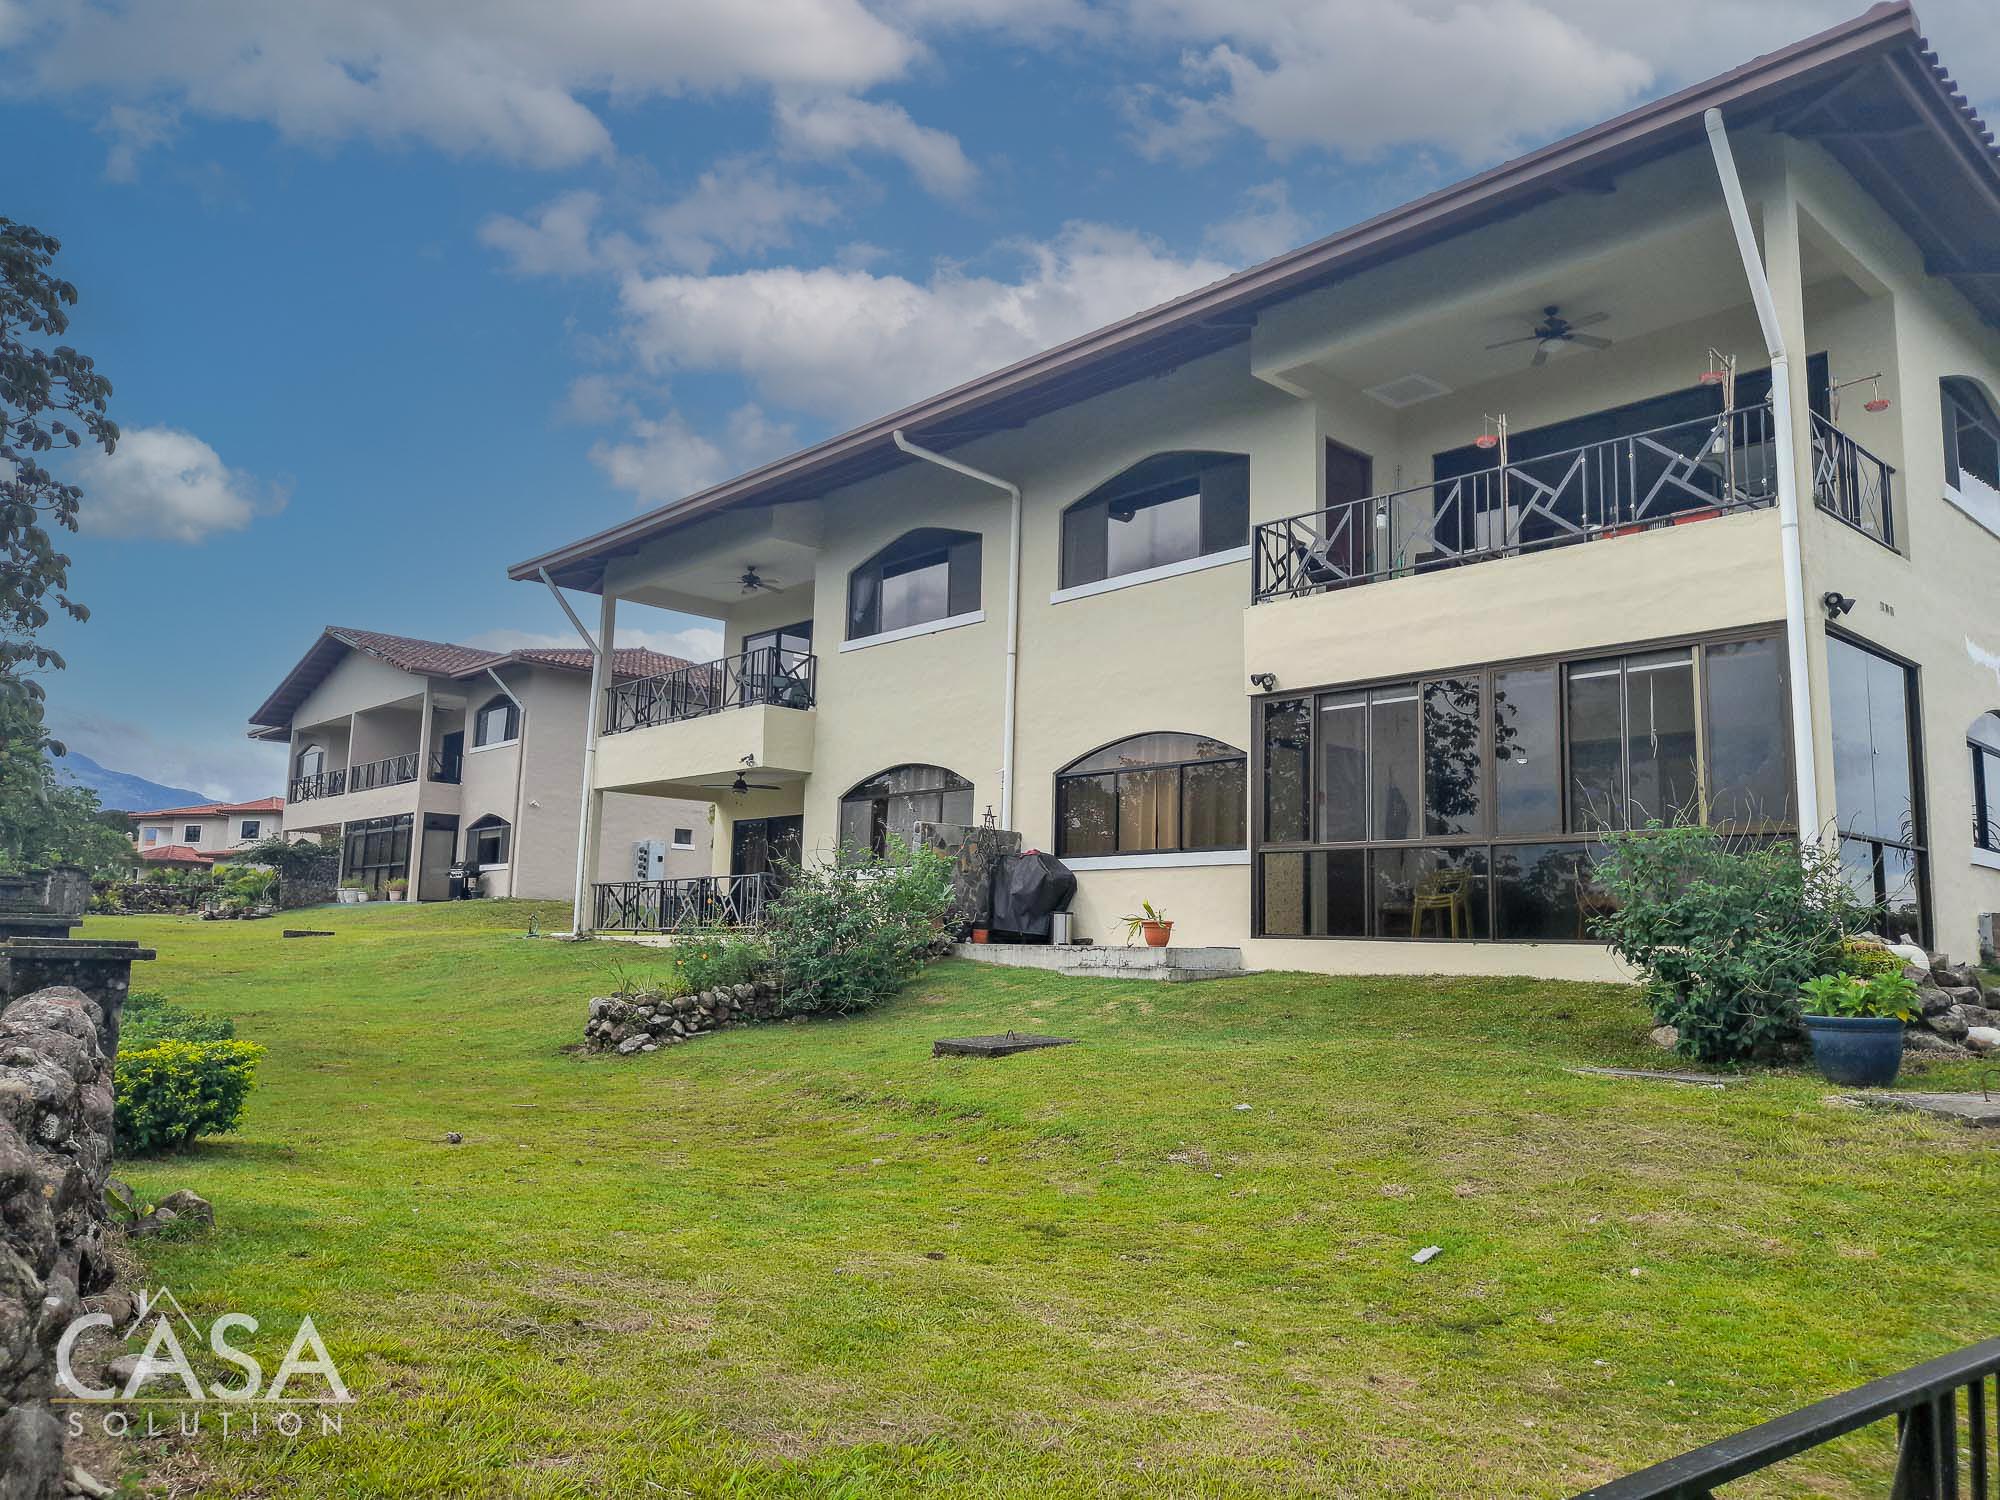 Price Reduction! Canyon View Condominium For Sale in Hacienda Los Molinos, Boquete. Fully Furnished